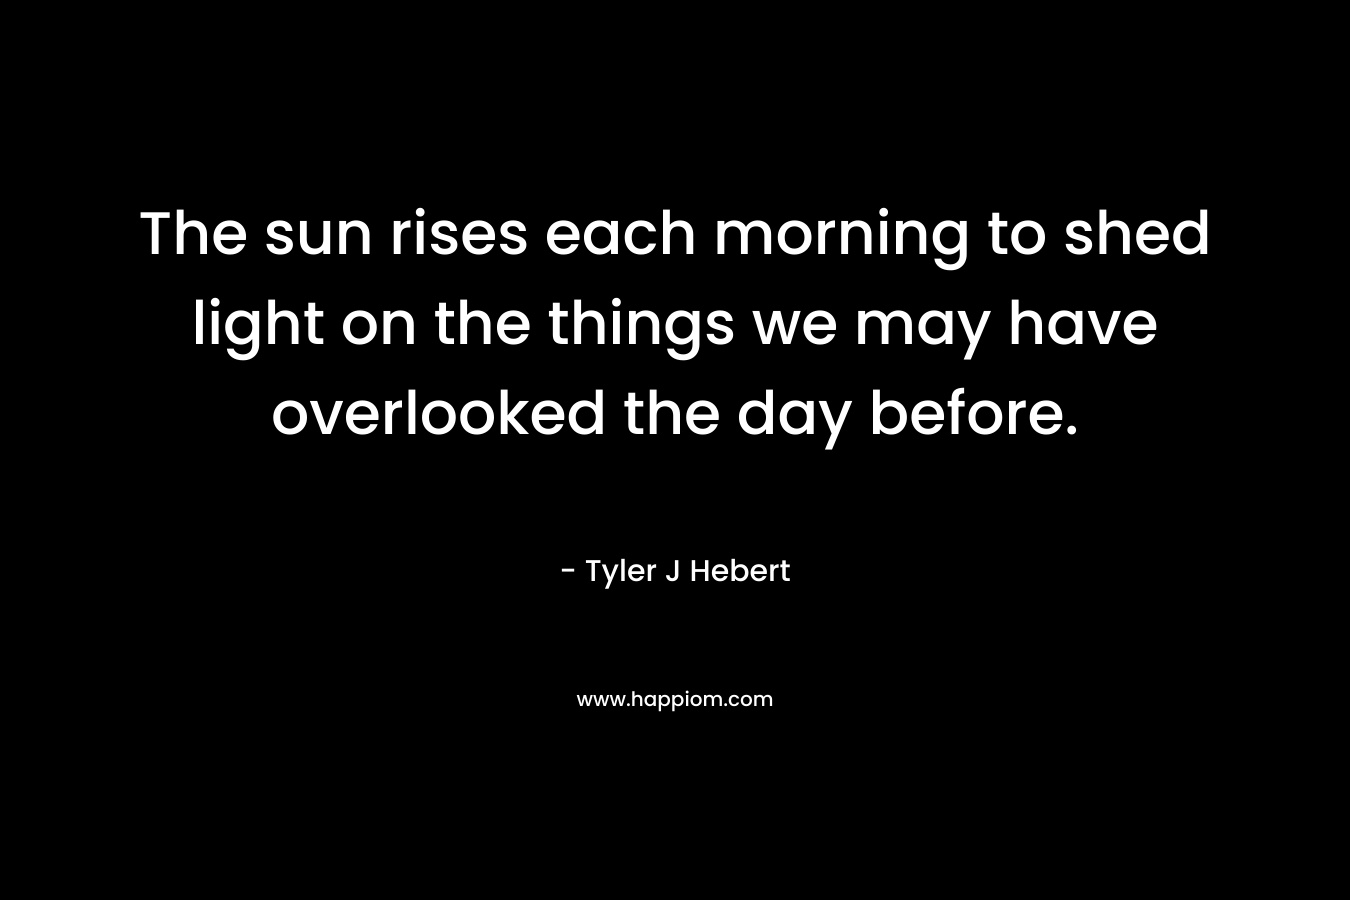 The sun rises each morning to shed light on the things we may have overlooked the day before.